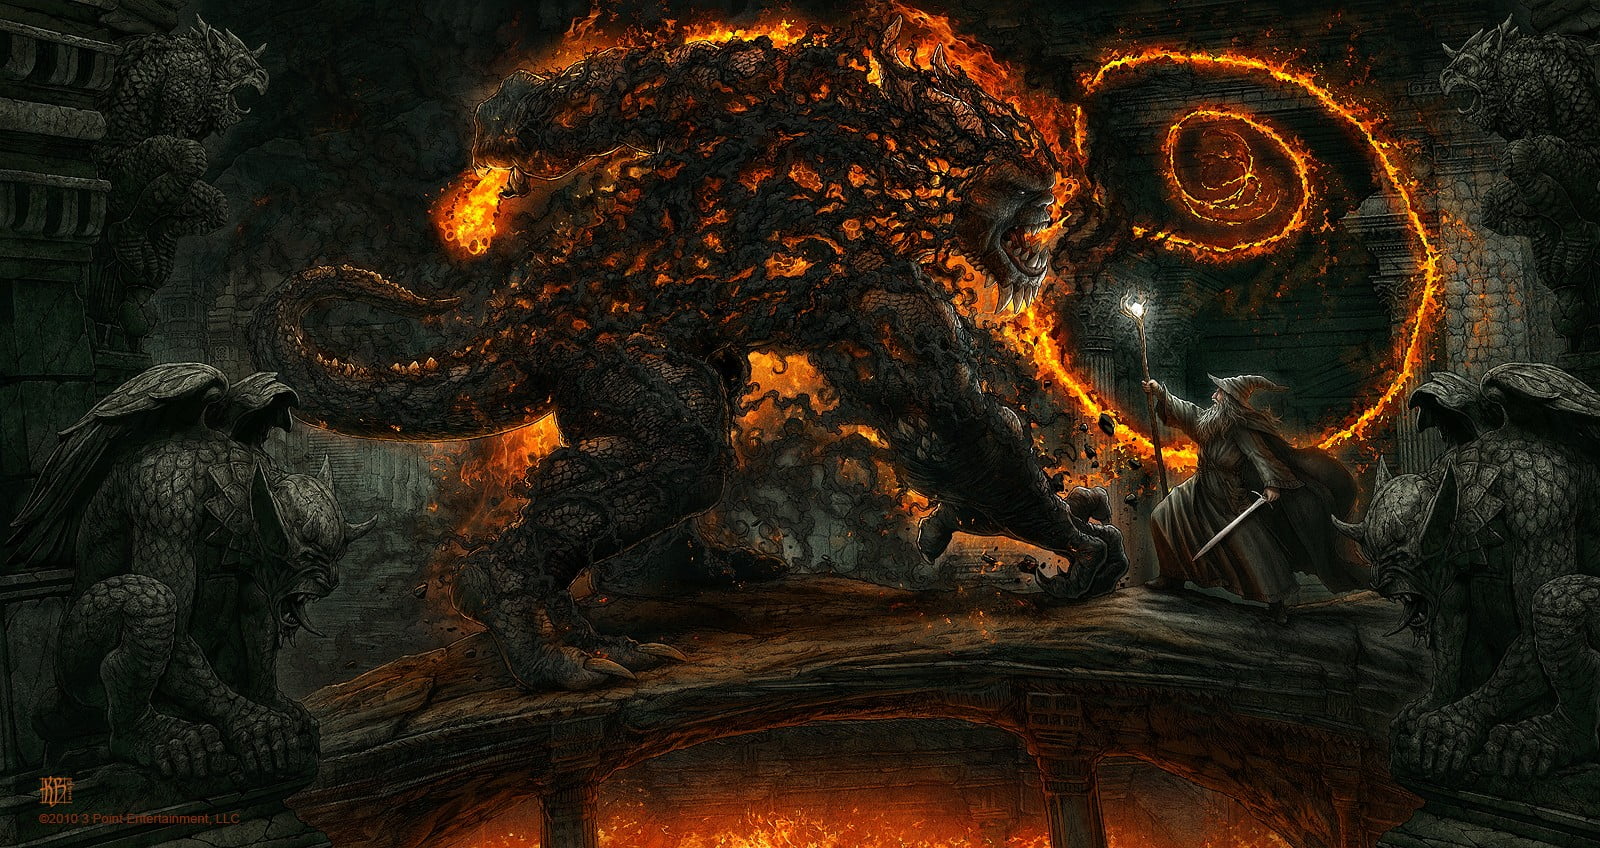 game character, Gandalf, Balrog, The Lord of the Rings, fantasy art